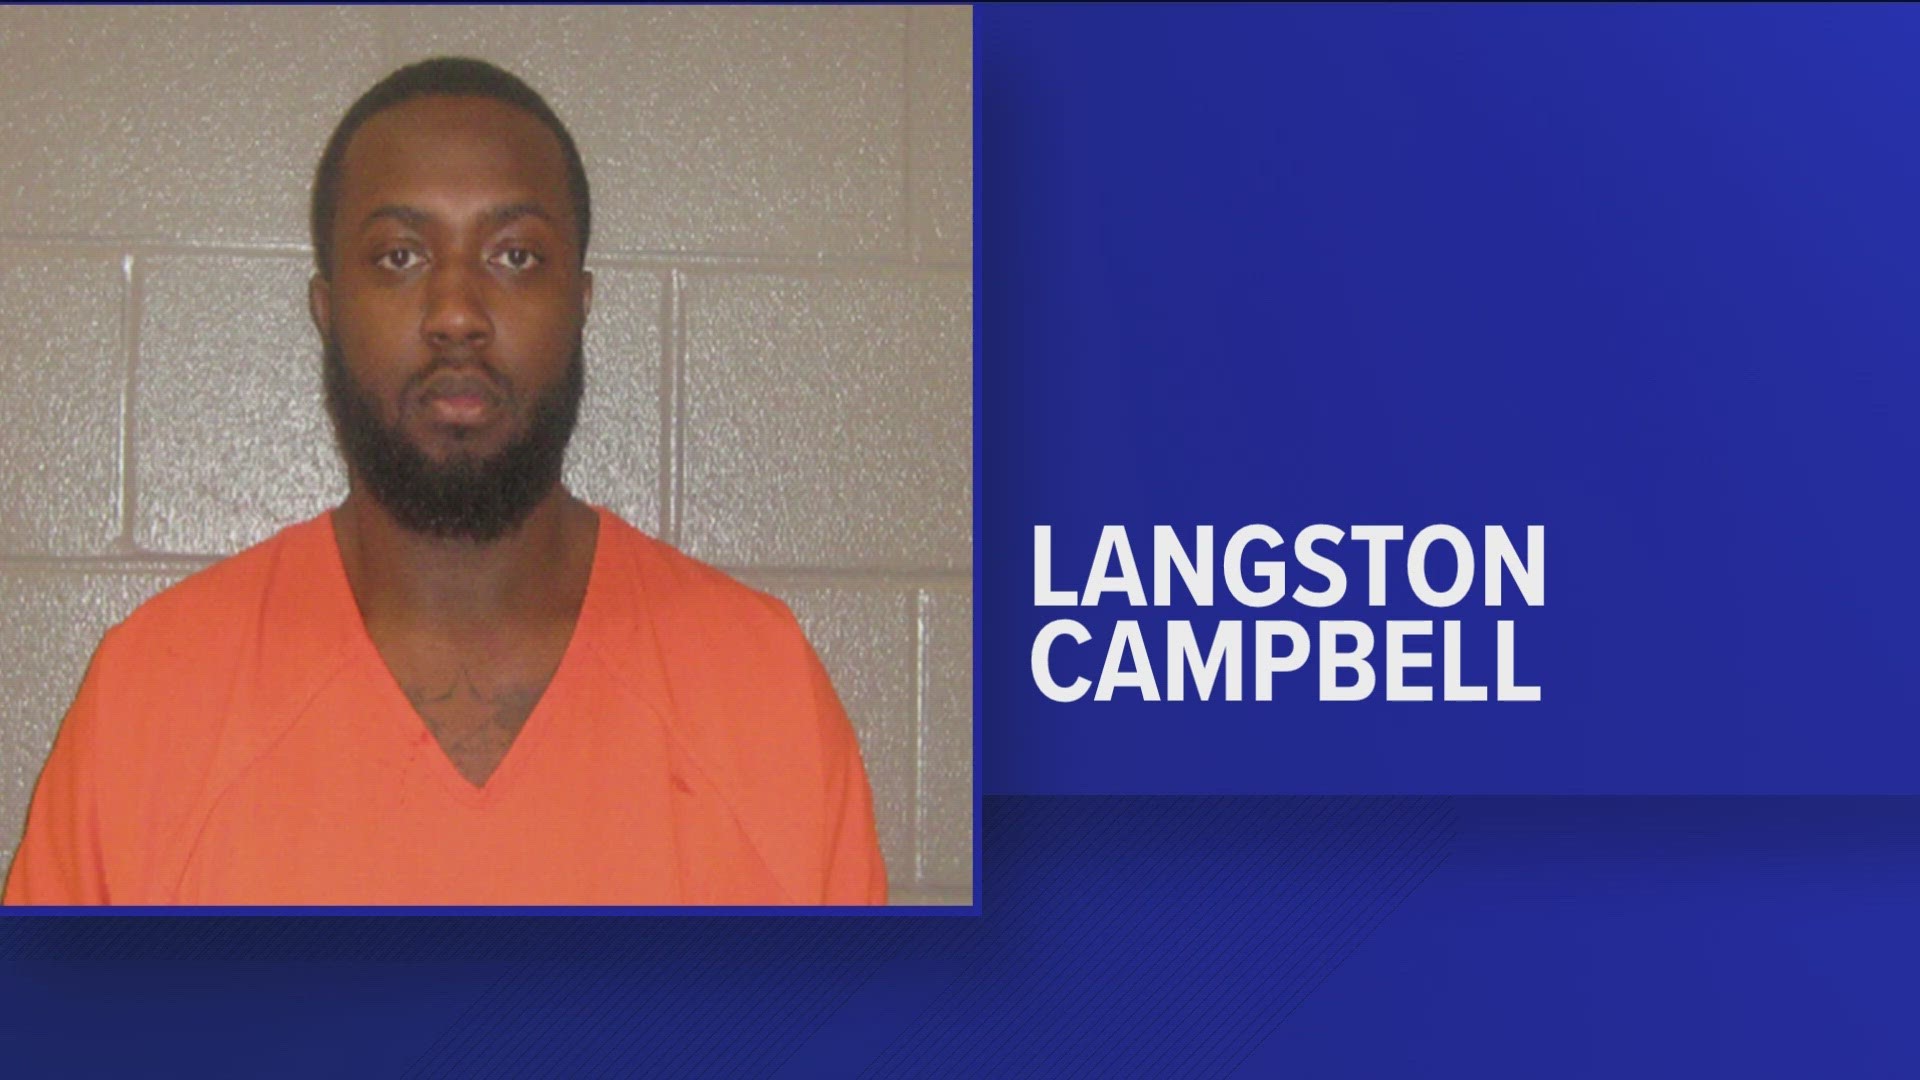 Langston Campbell was indicted on two counts of first-degree kidnapping with repeat violent offender specifications, tampering with evidence and other charges.